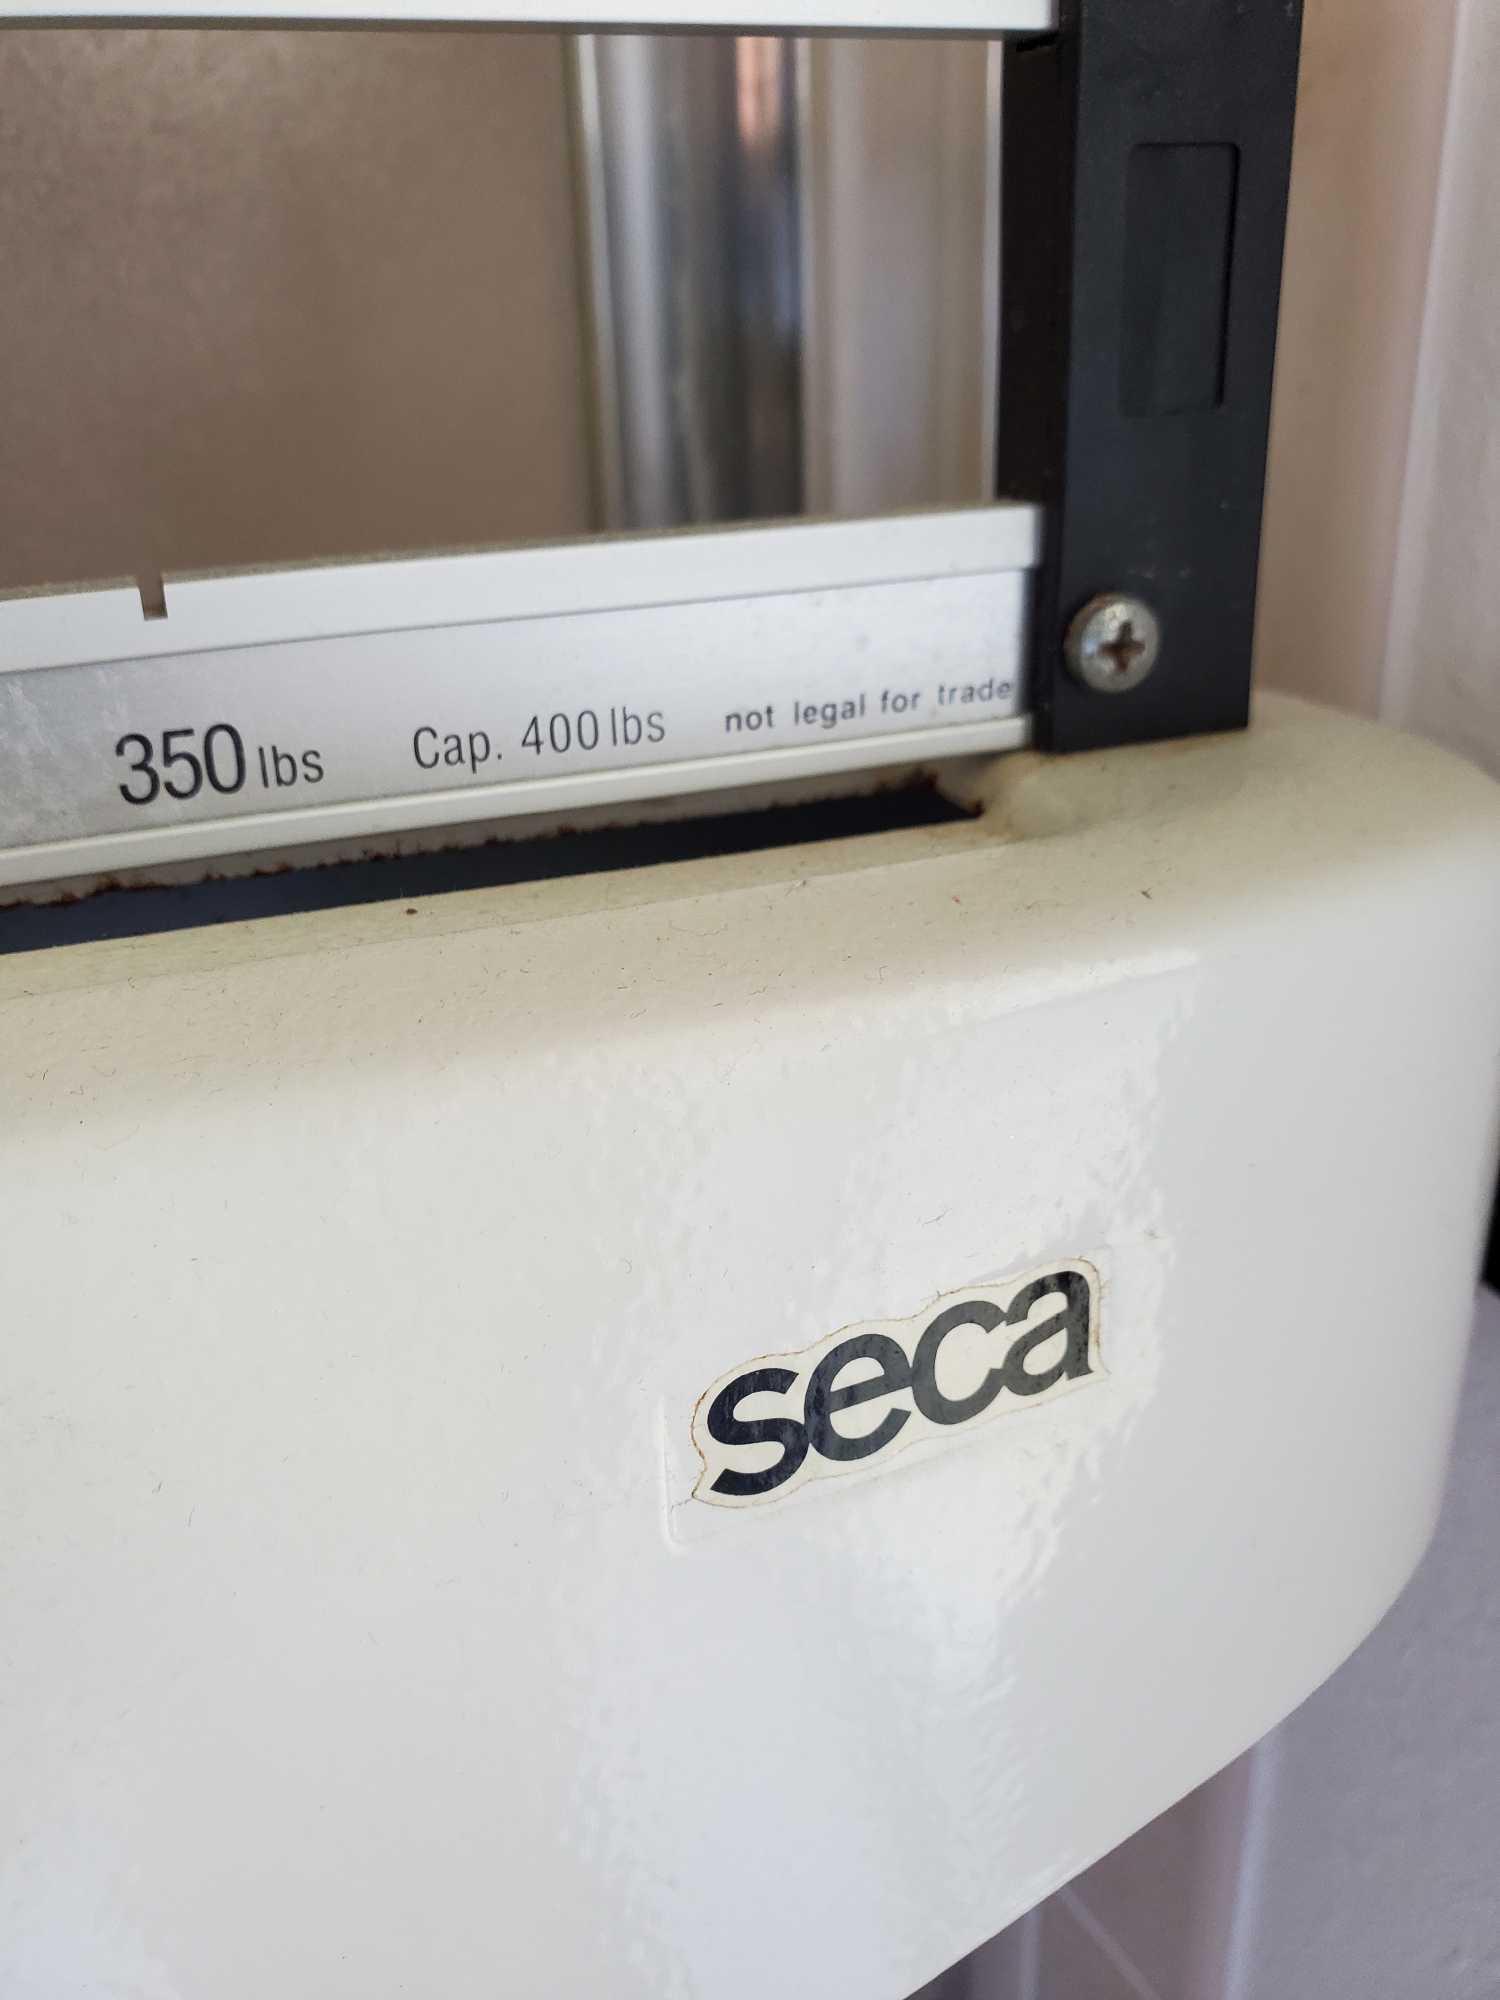 SECA professional bathroom scale, made in Germany